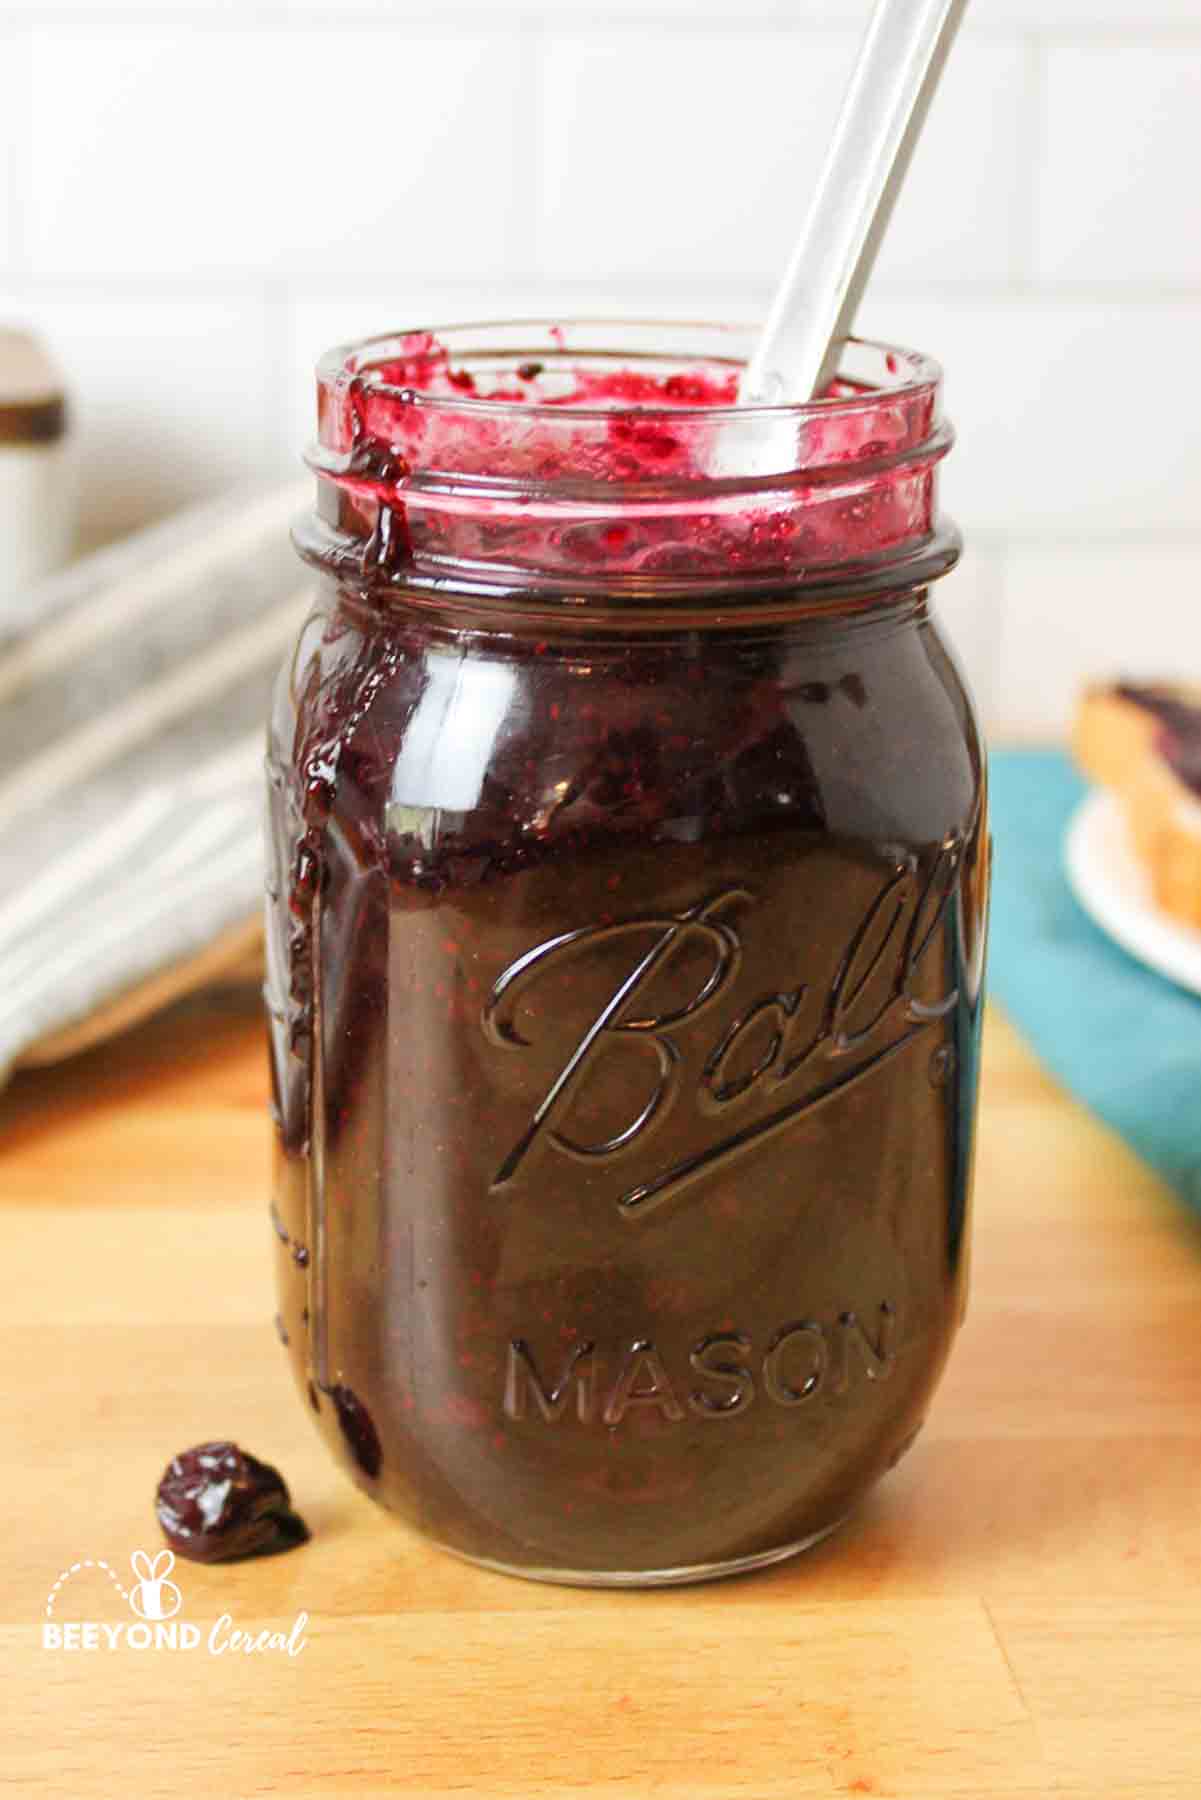 a jar filled with sugar free blueberry jam and a mess of jam running down the side of the jar